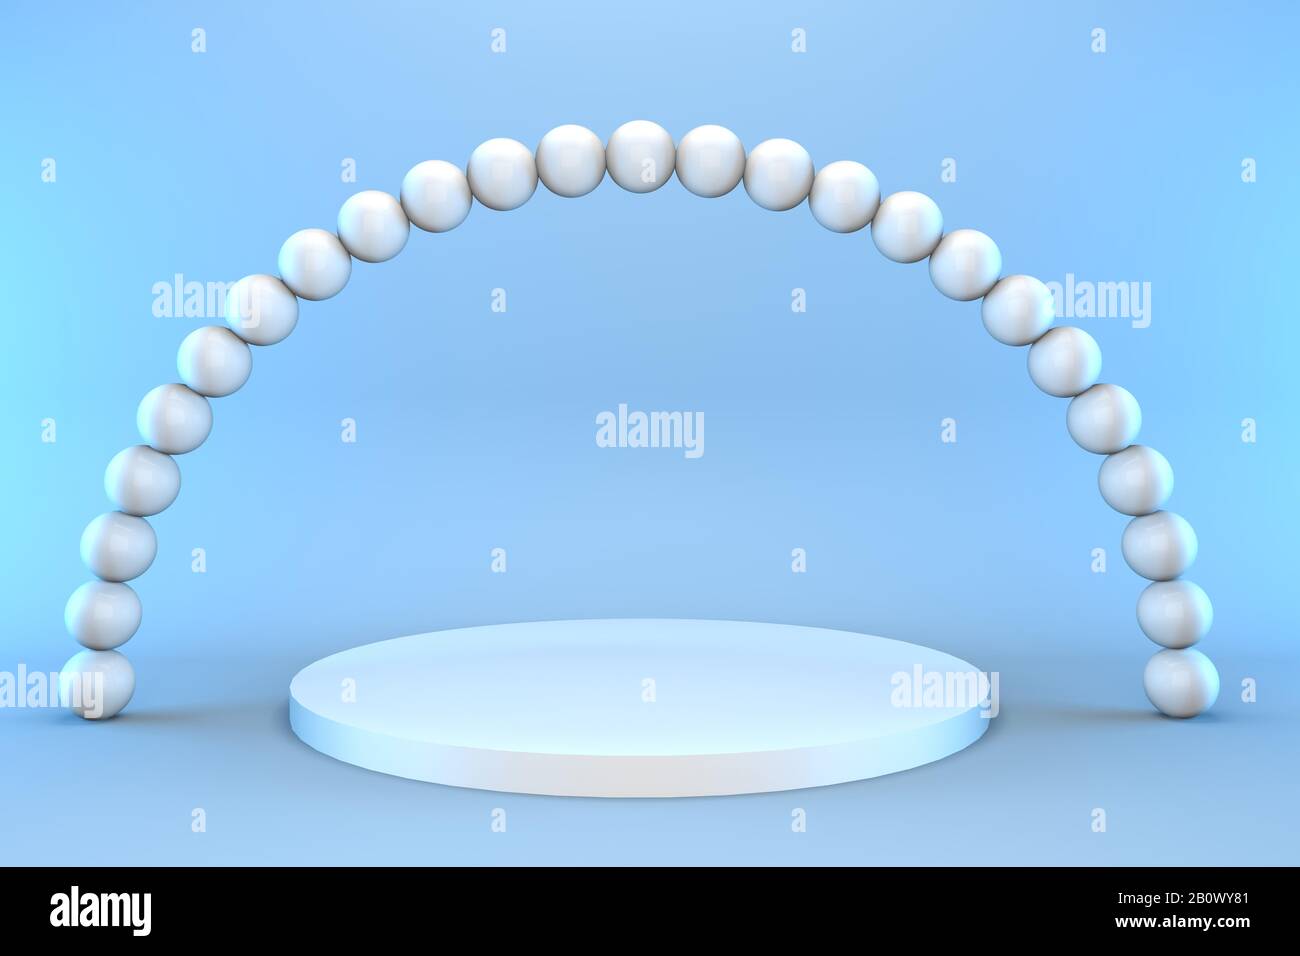 3d render round pedestal with pearls on a blue background. Minimalistic podium concept for goods. Stock Photo